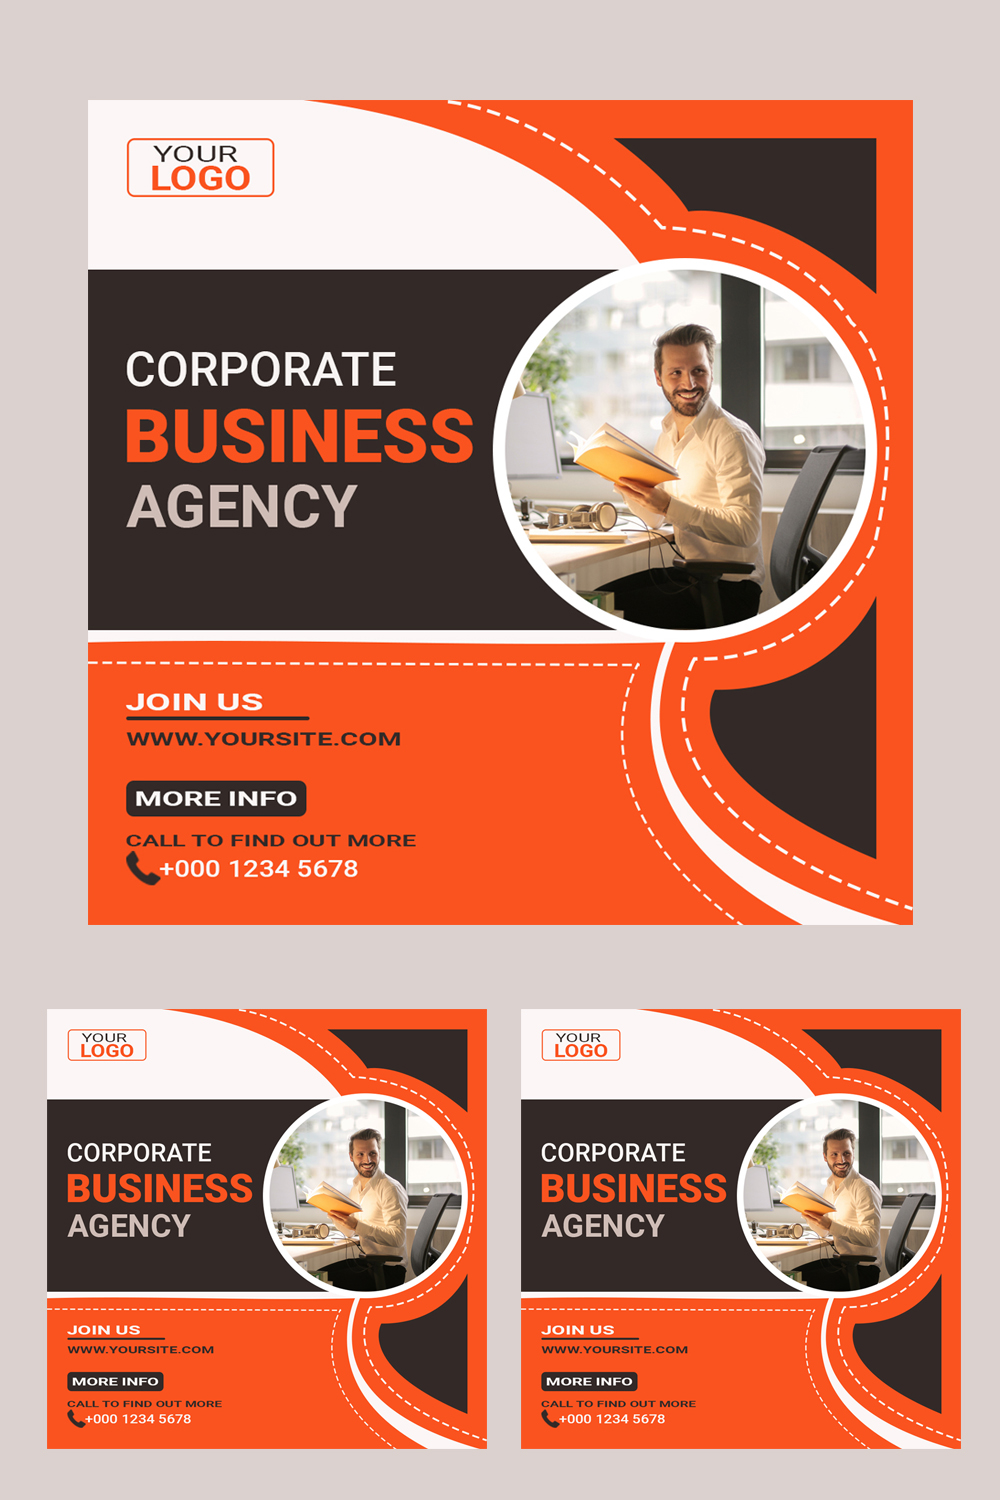 Corporate Business Agency pinterest image.